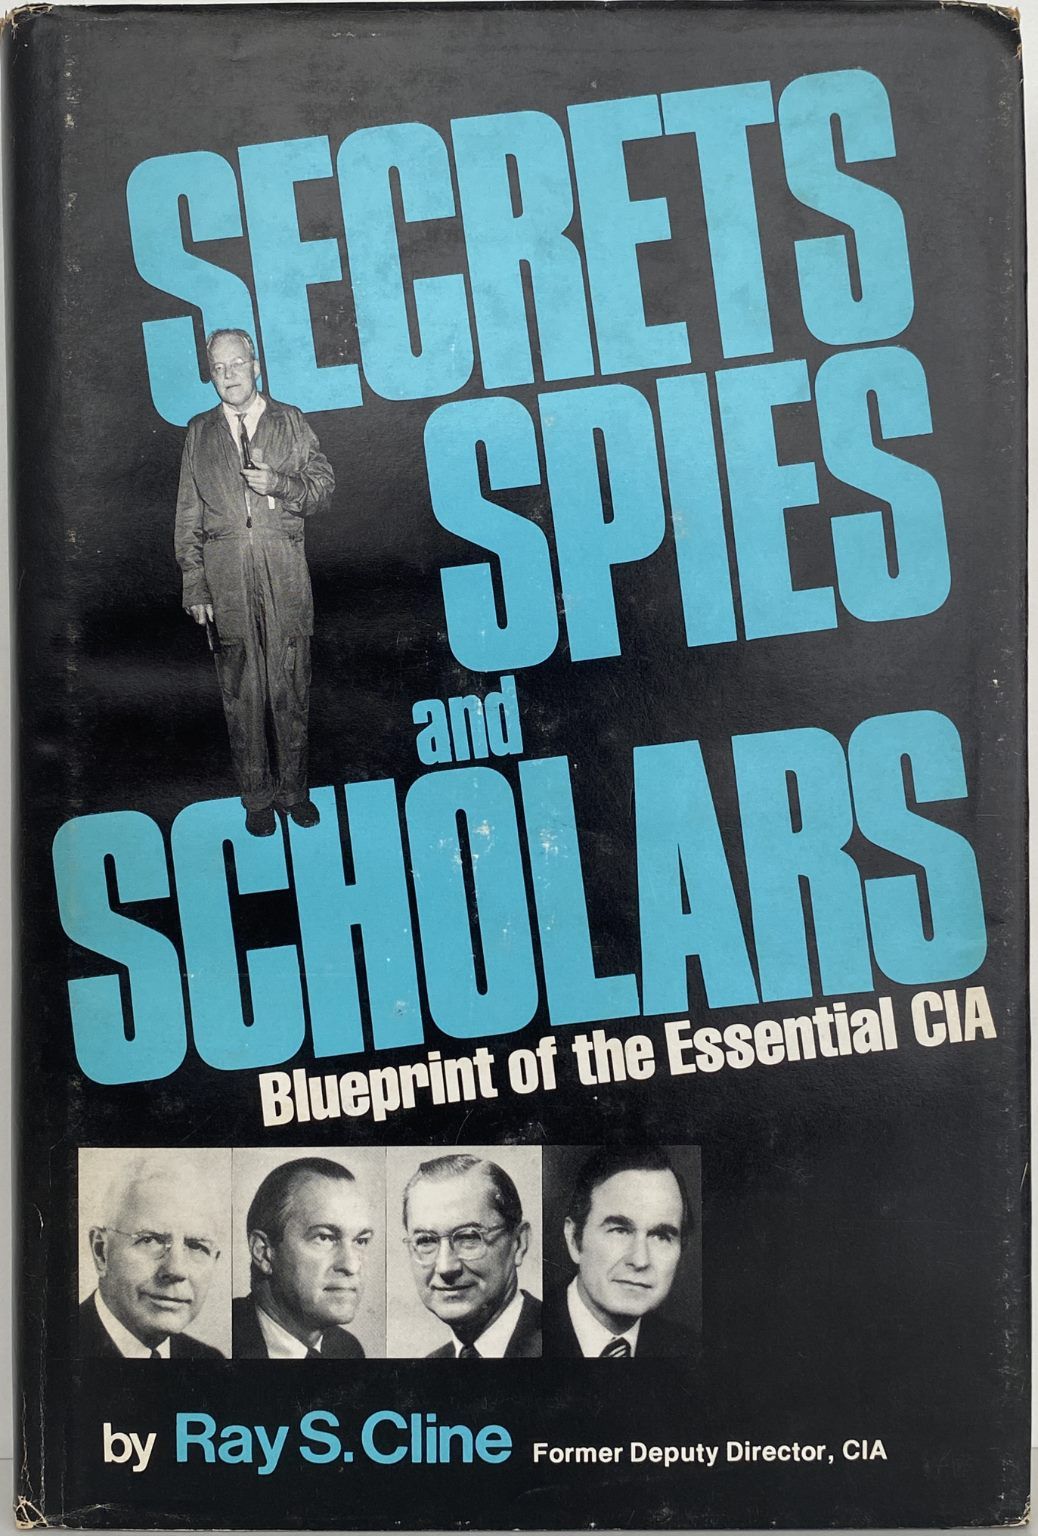 SECRETS SPIES and SCHOLARS: Blueprint of the Essential CIA